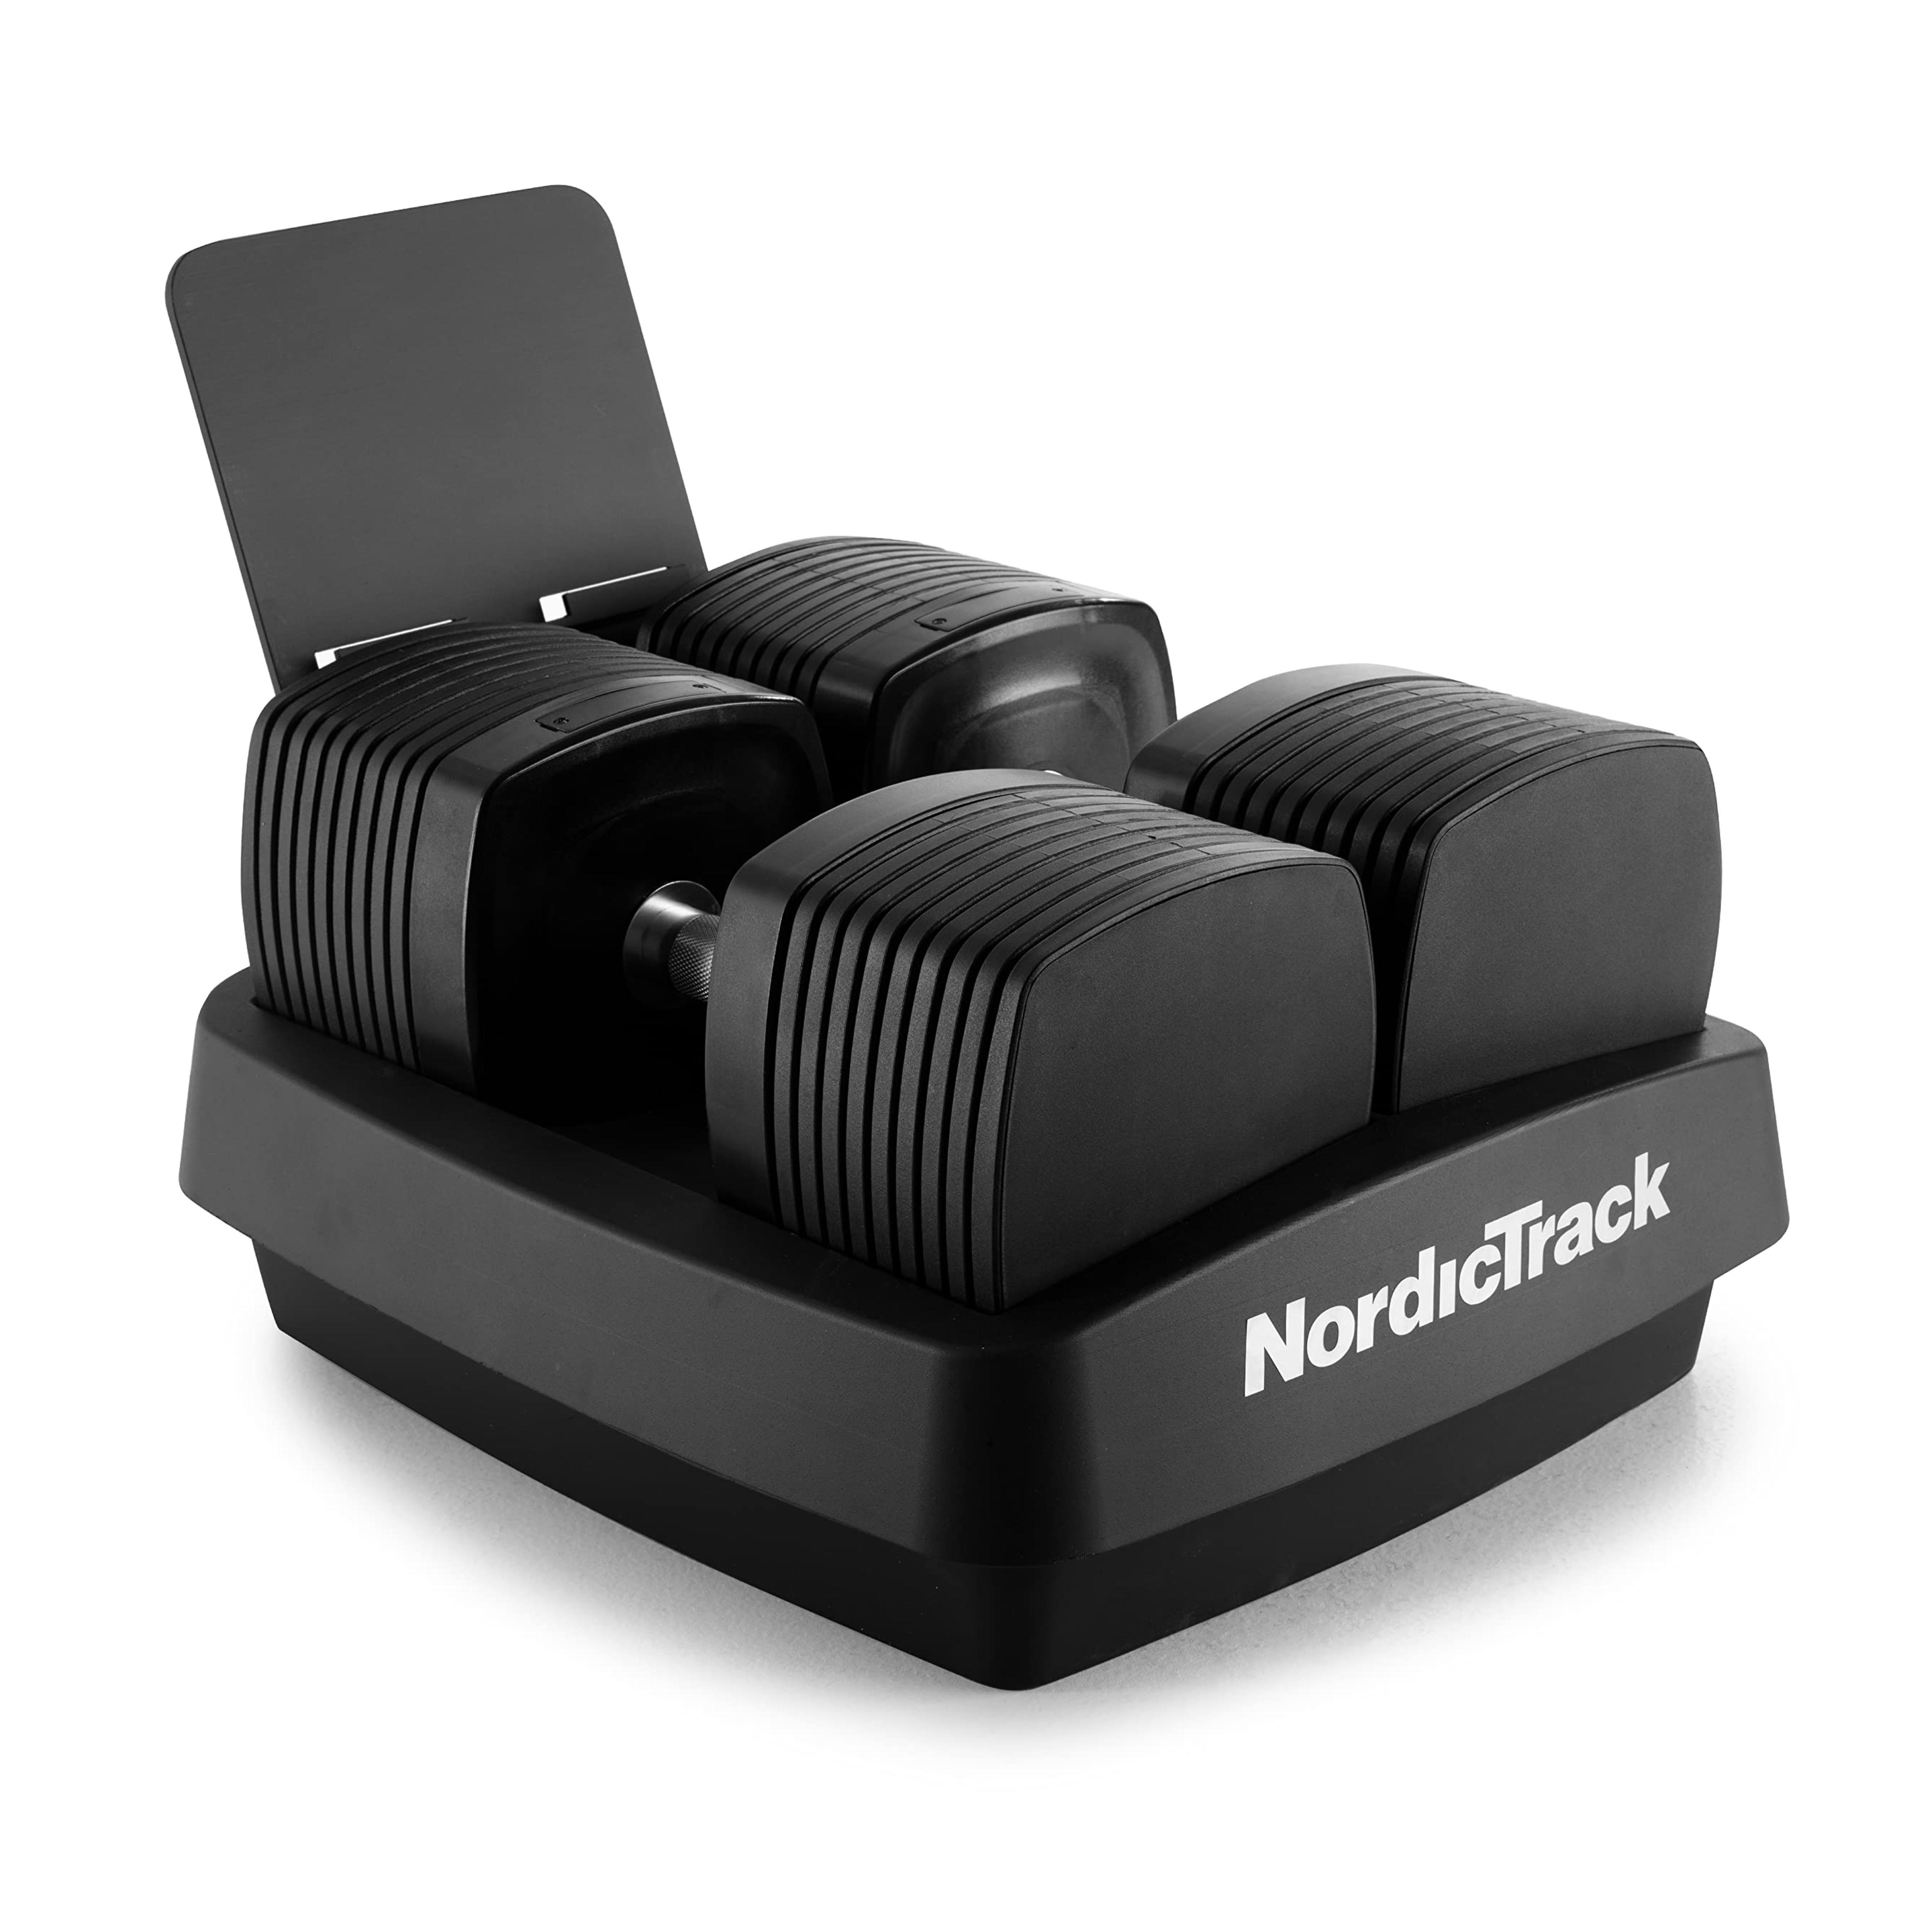 Amazon.com : NordicTrack 50 Lb iSelect Adjustable Dumbbells, Works with Alexa, Sold as Pair : Sports & Outdoors